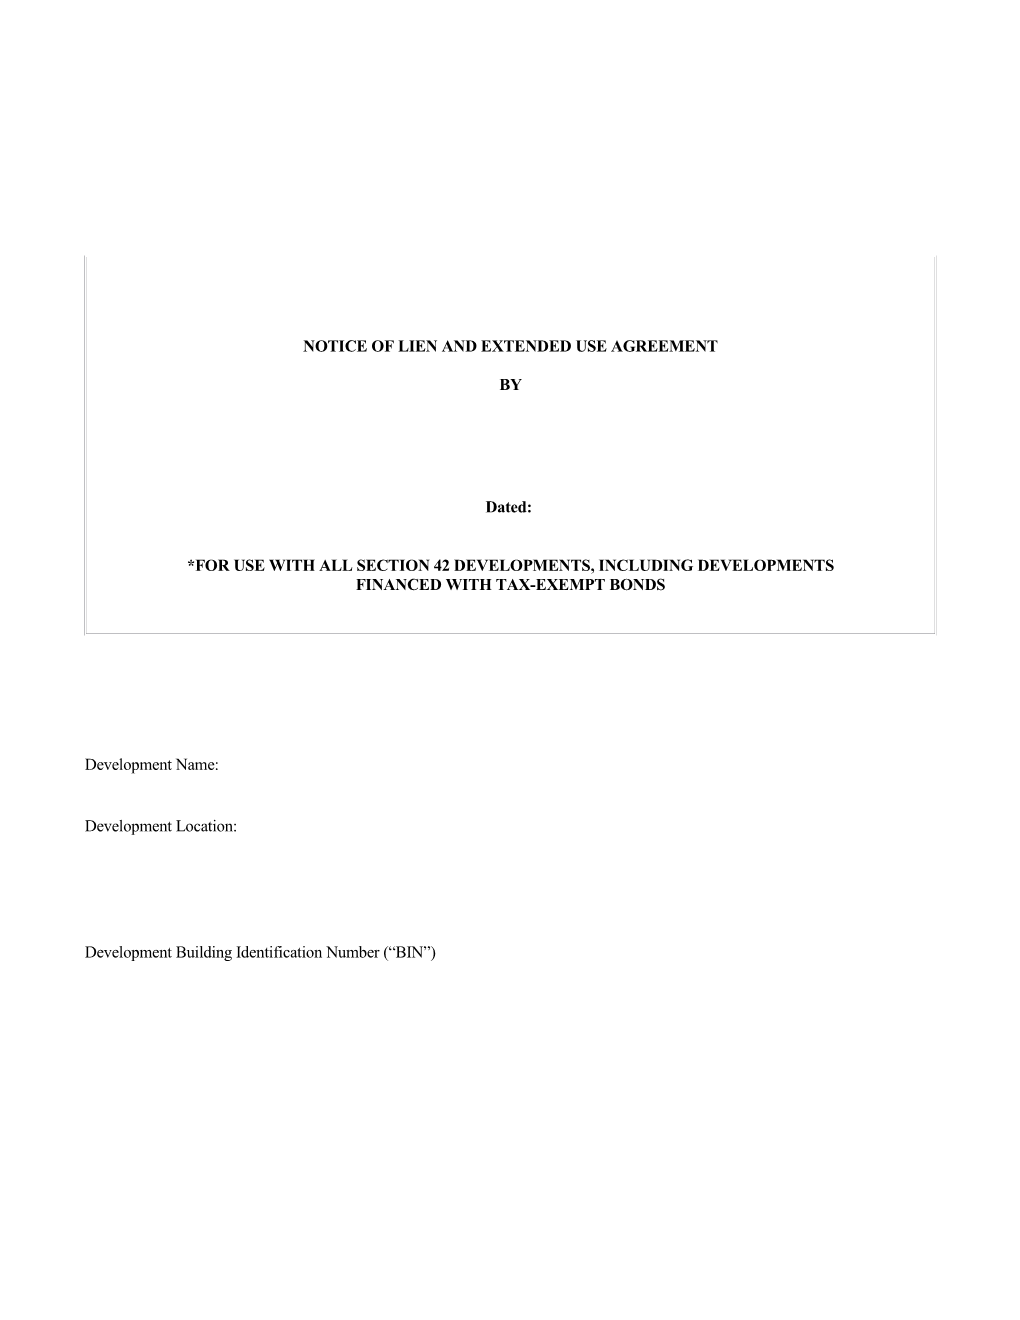 Grant, Lien, and Restrictive Covenant Agreement